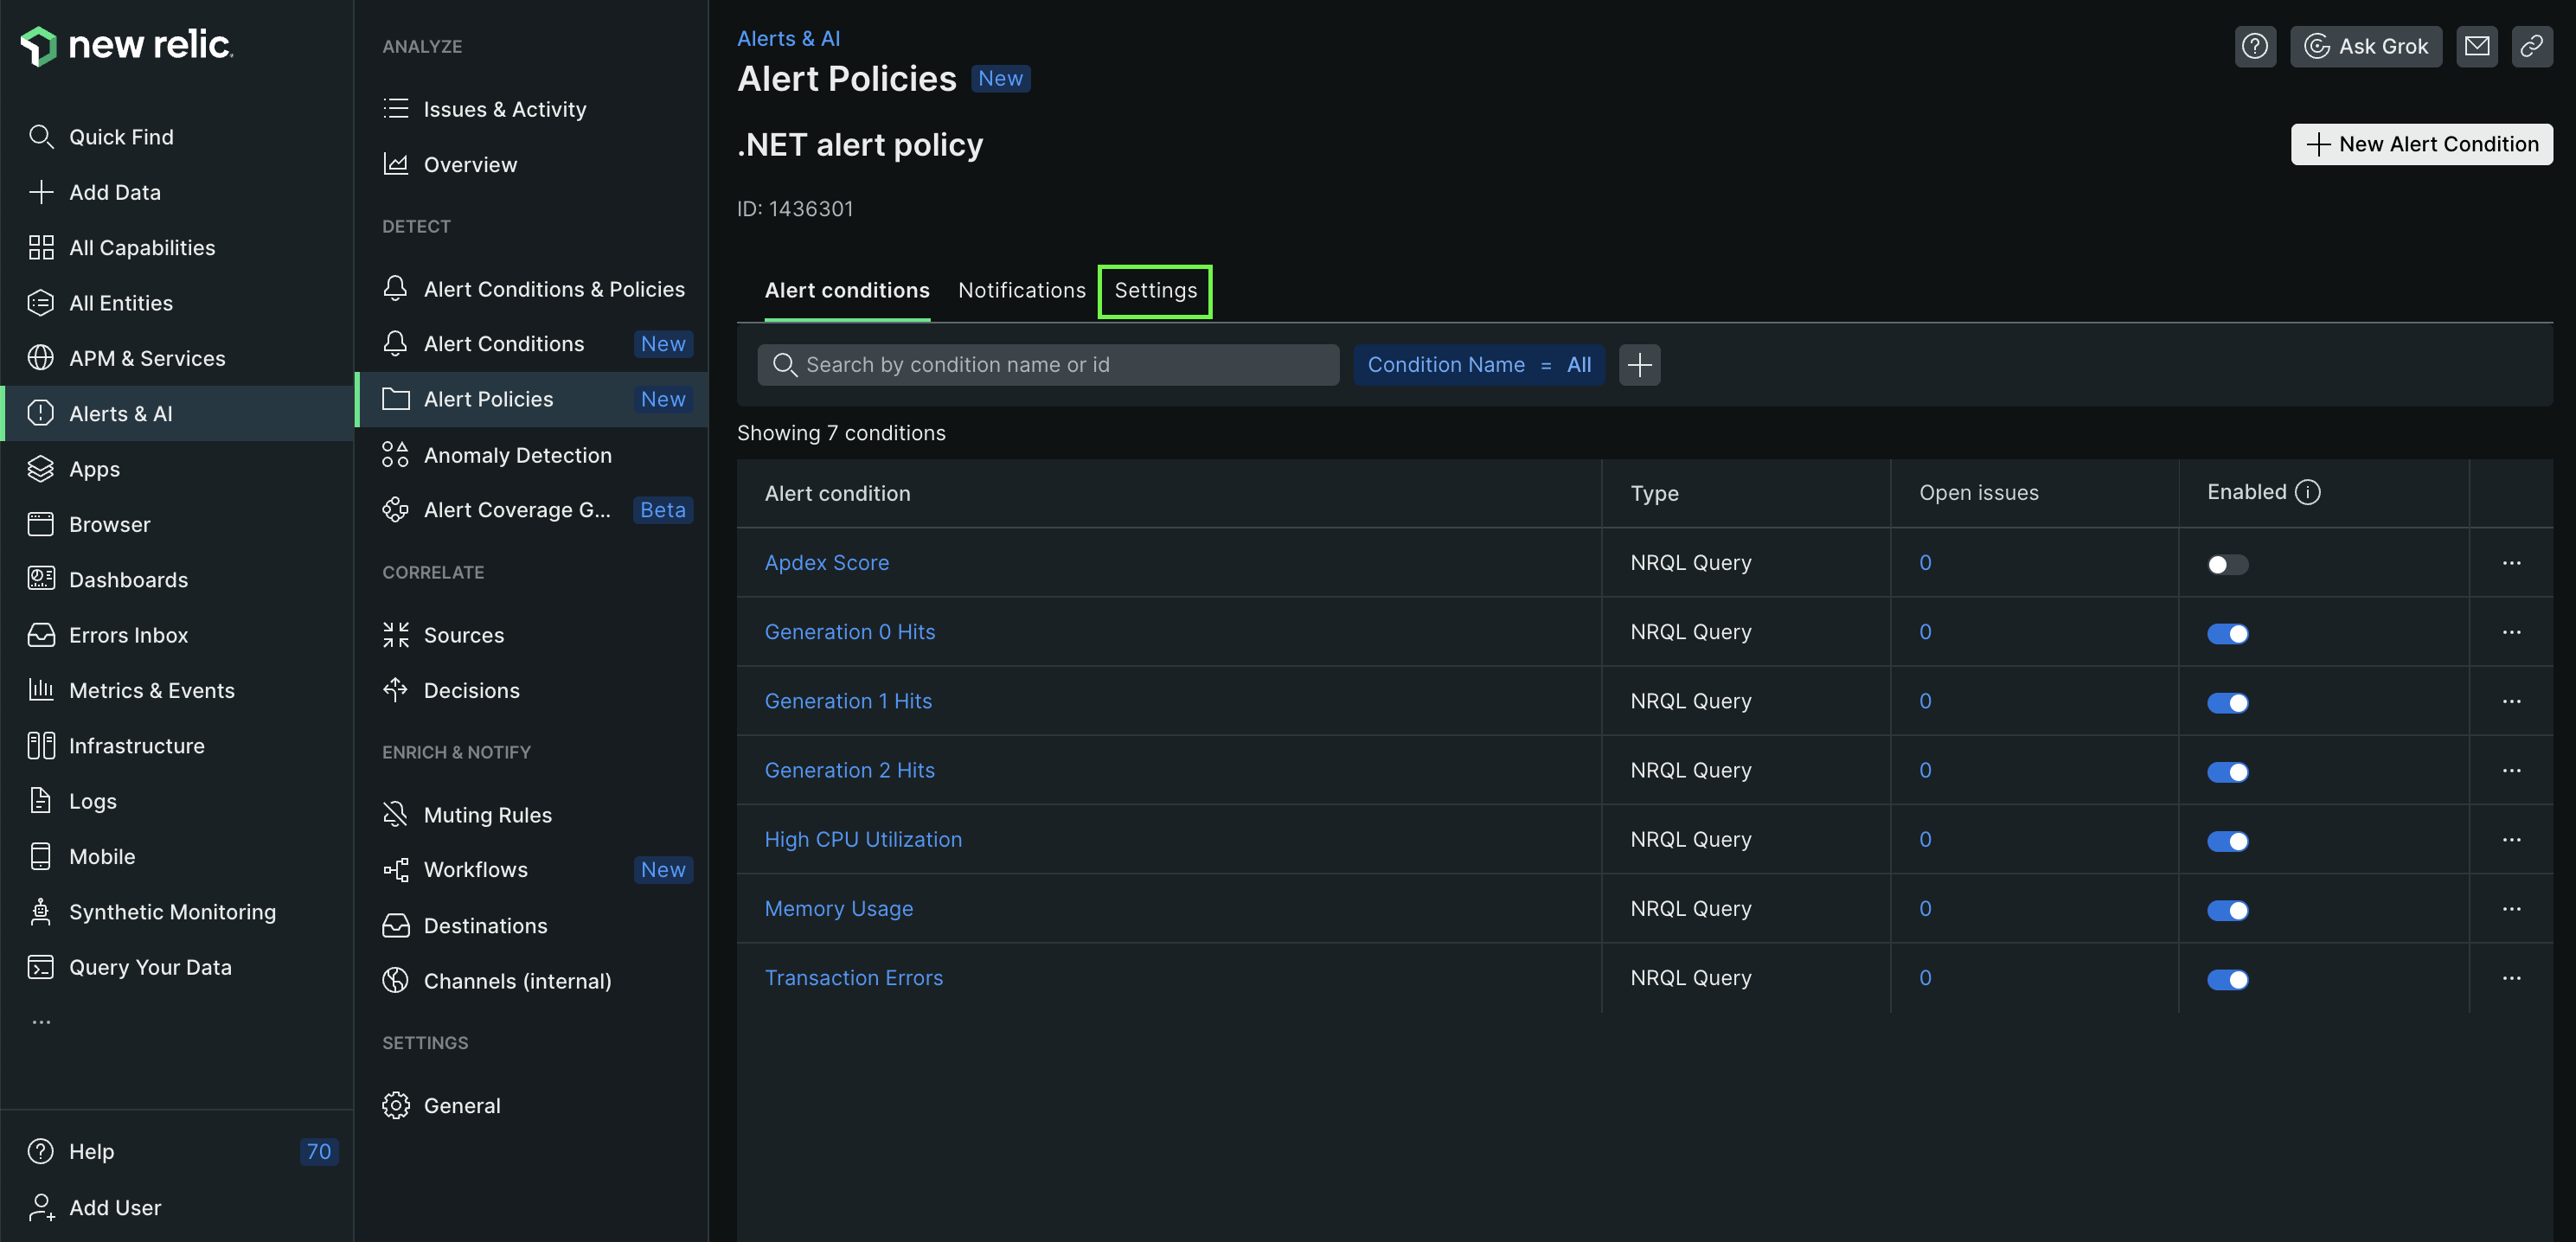 A screenshot showing where the issue preference button is inside the alerts user interface.